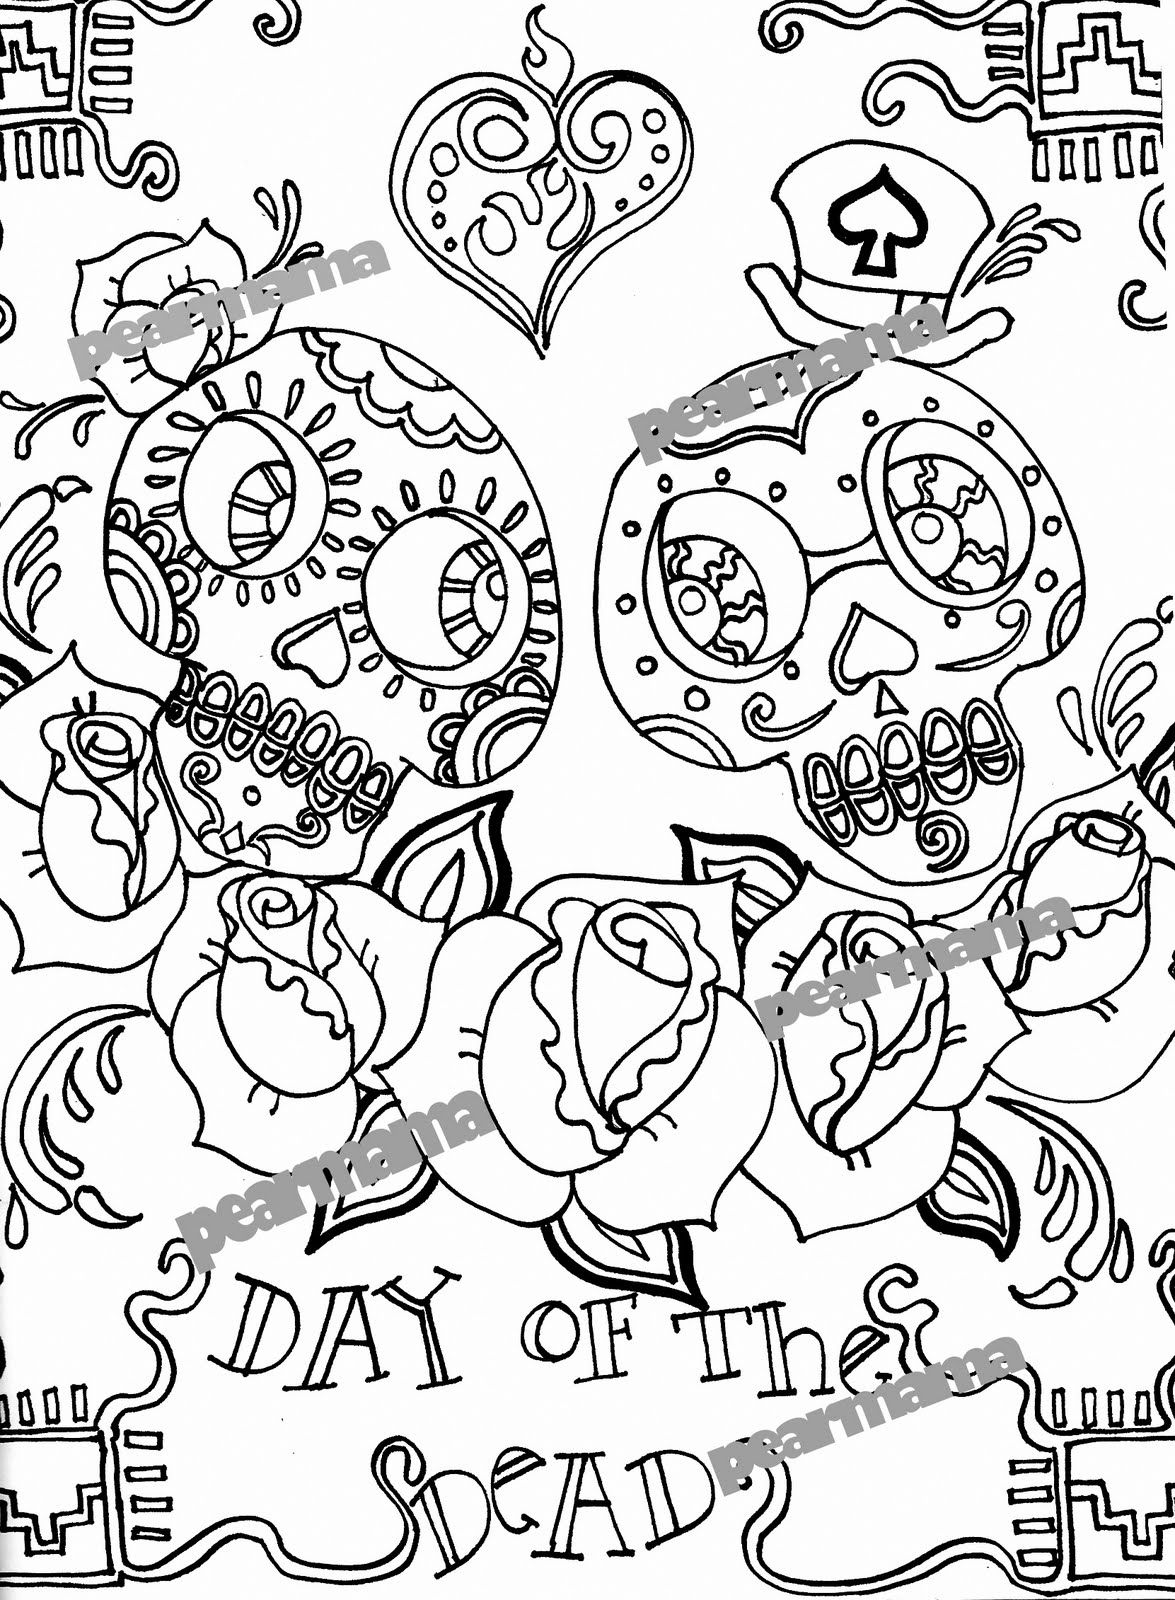 Day of the Dead Lesson Plan with Printables | Modern Art 4 Kids